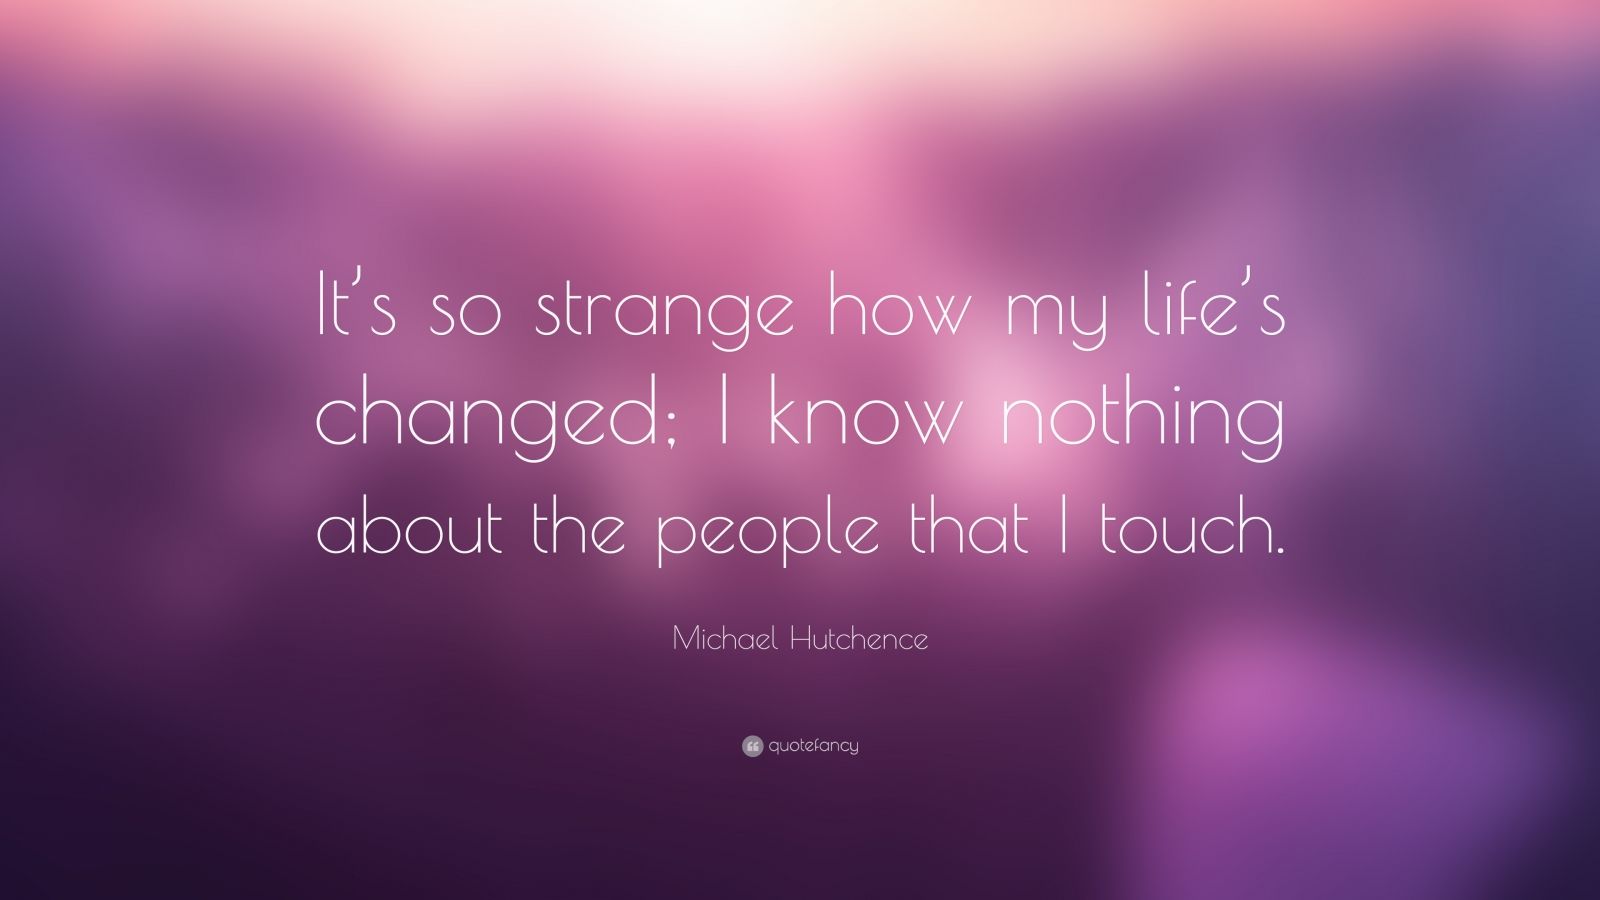 Michael Hutchence Quote: “It’s so strange how my life’s changed; I know ...